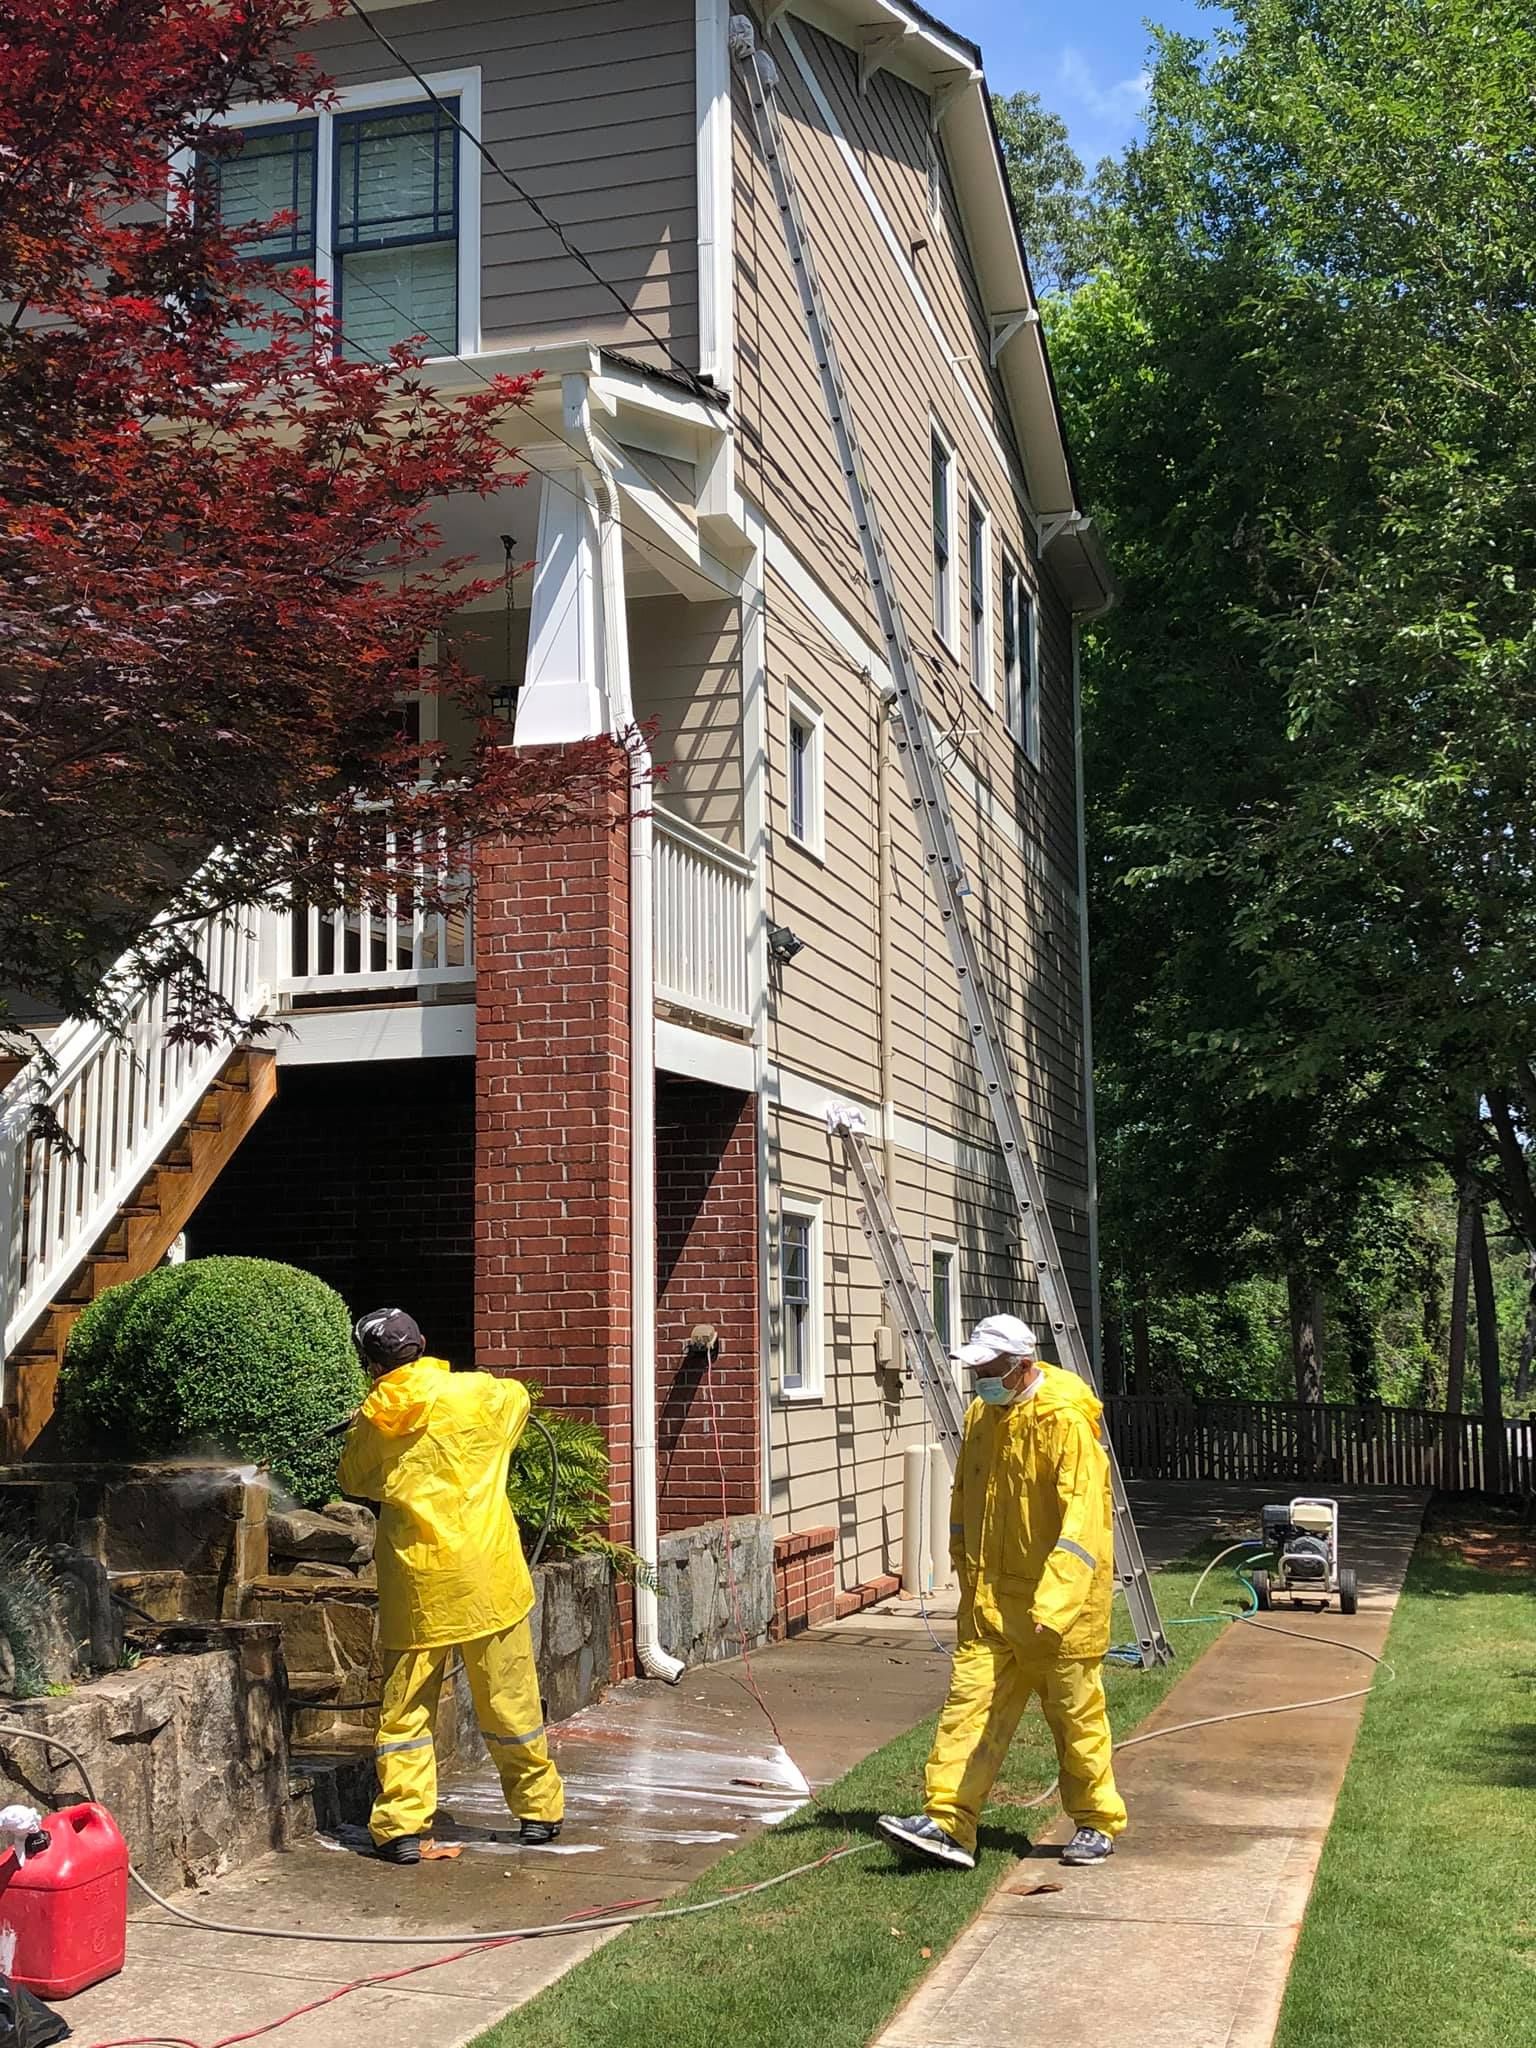 Pressure Washing for Euro Pro Painting Company in Lawerenceville, GA